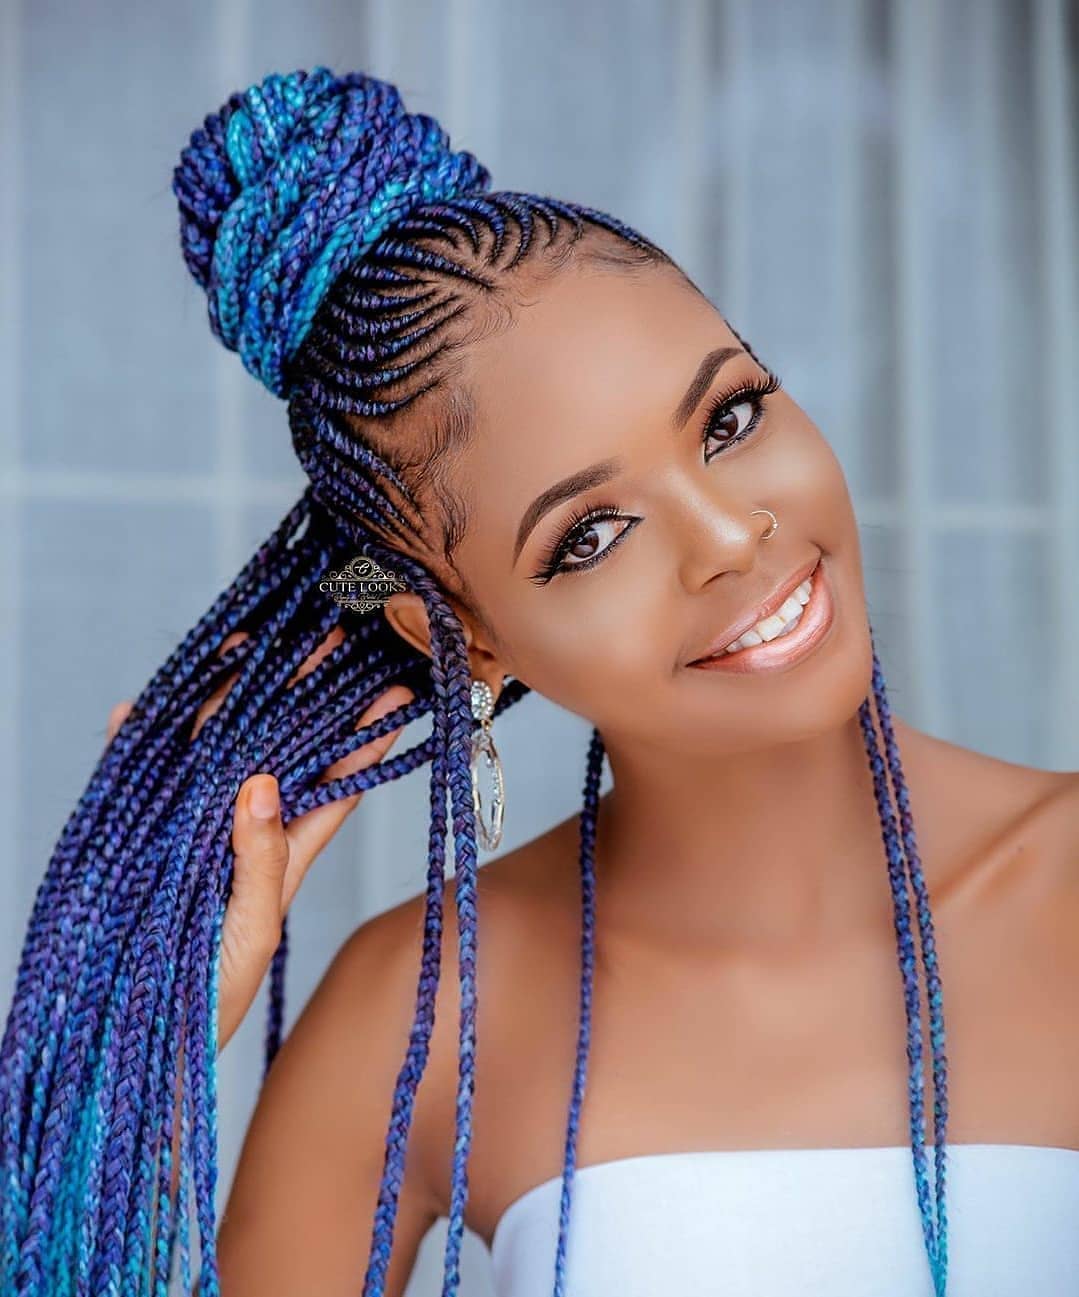 20+ Attractive And Unique Braided Hairstyles For Black Women In 2021